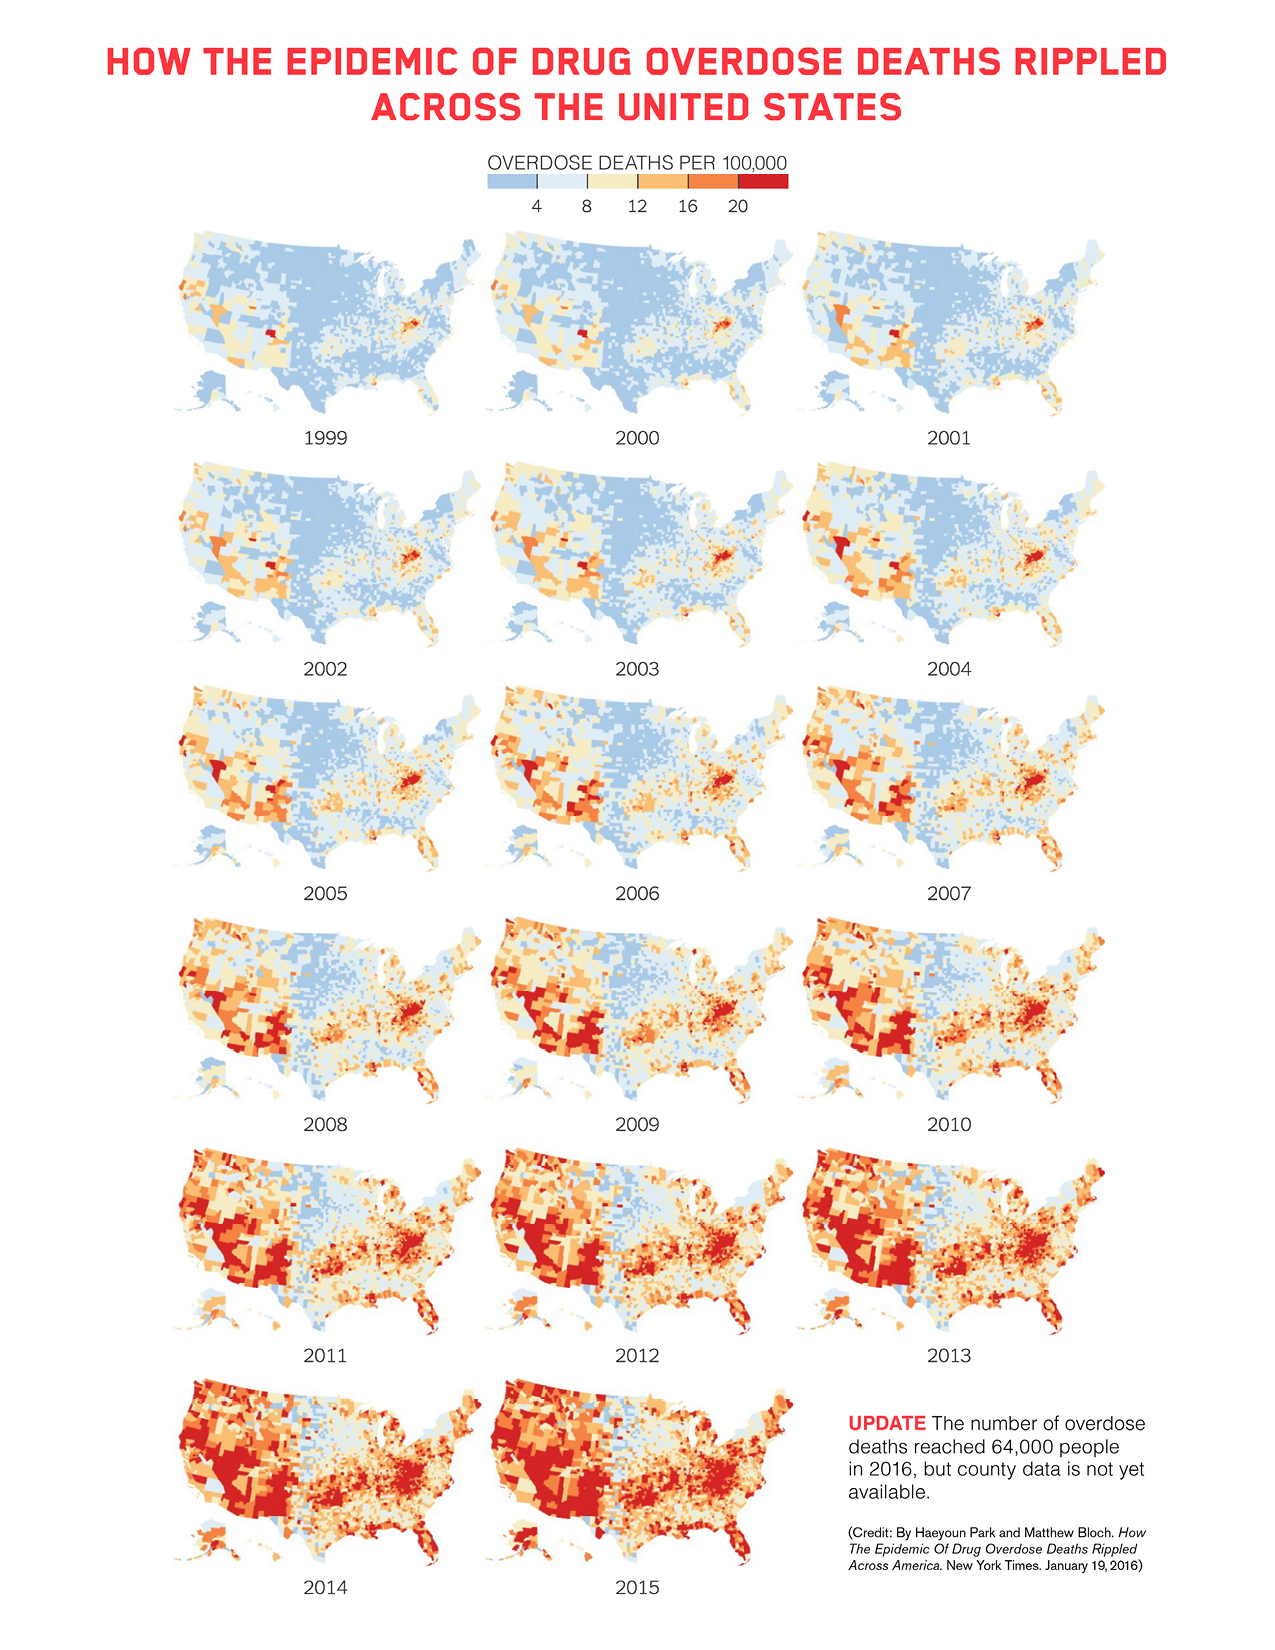 Infographic: How the Epidemic of Drug Overdoes Deaths Rippled Across the United States